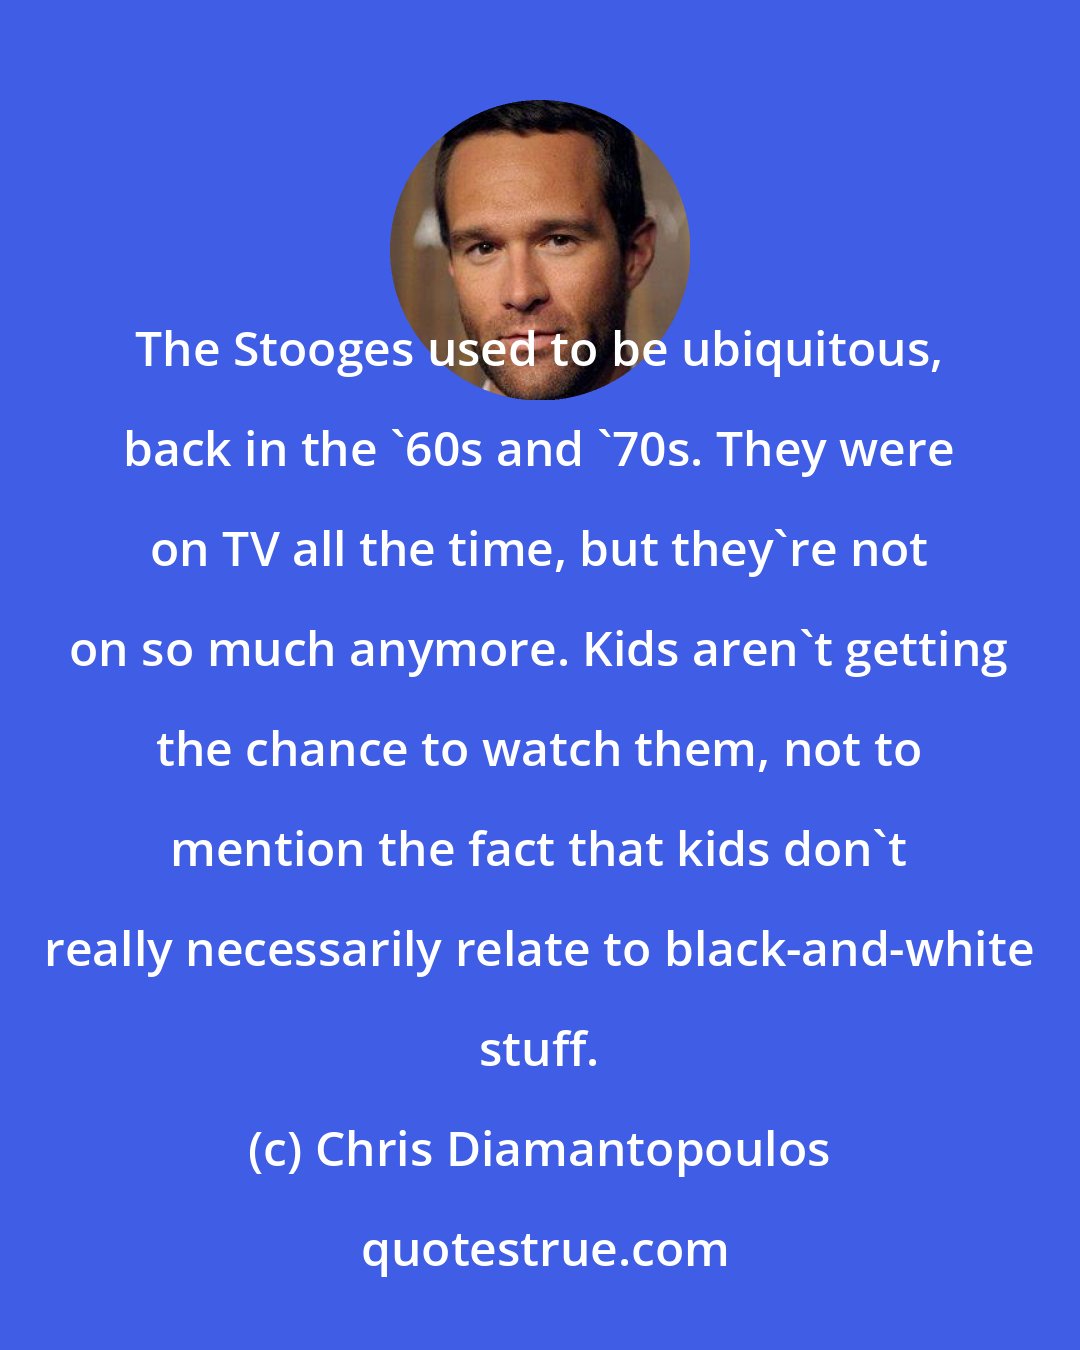 Chris Diamantopoulos: The Stooges used to be ubiquitous, back in the '60s and '70s. They were on TV all the time, but they're not on so much anymore. Kids aren't getting the chance to watch them, not to mention the fact that kids don't really necessarily relate to black-and-white stuff.